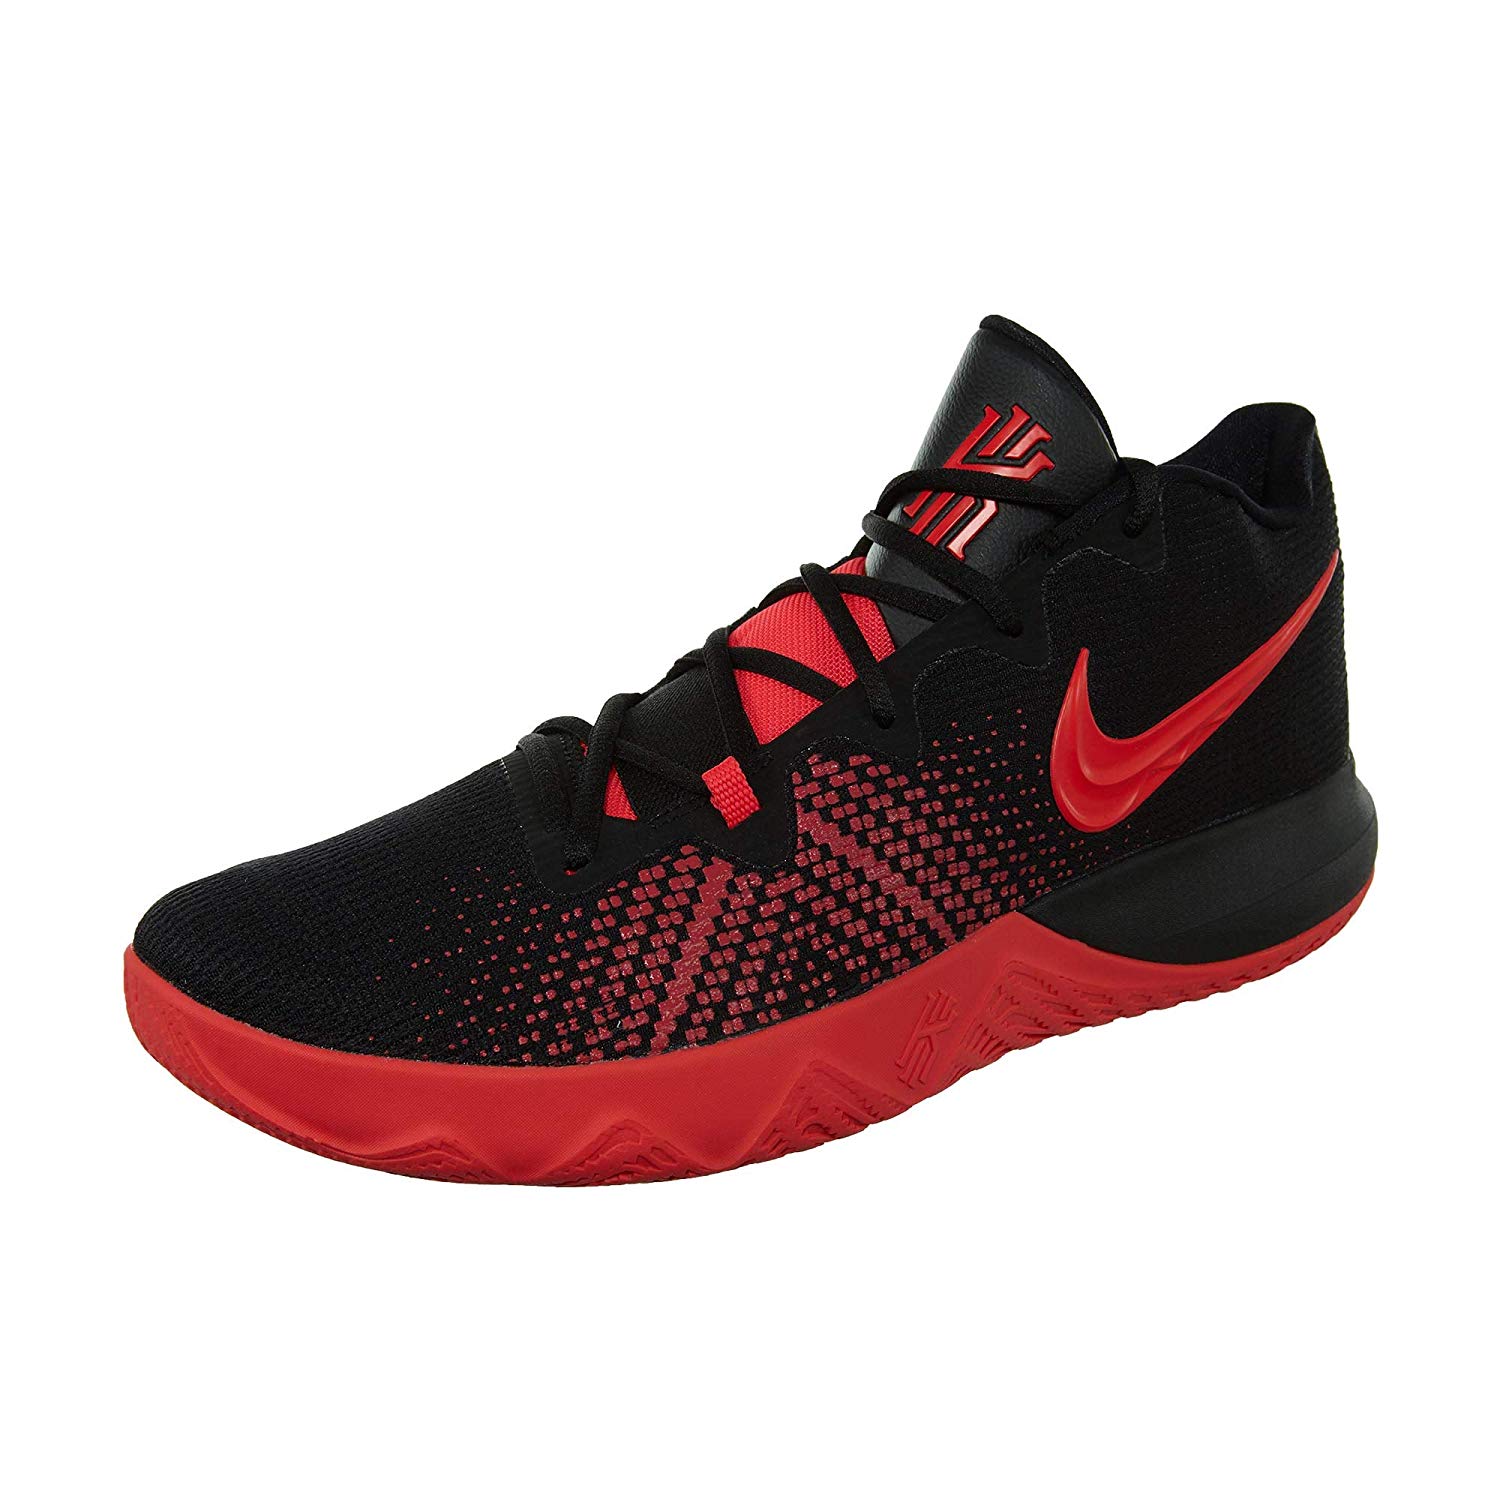 Nike Kyrie Flytrap Reviewed for 